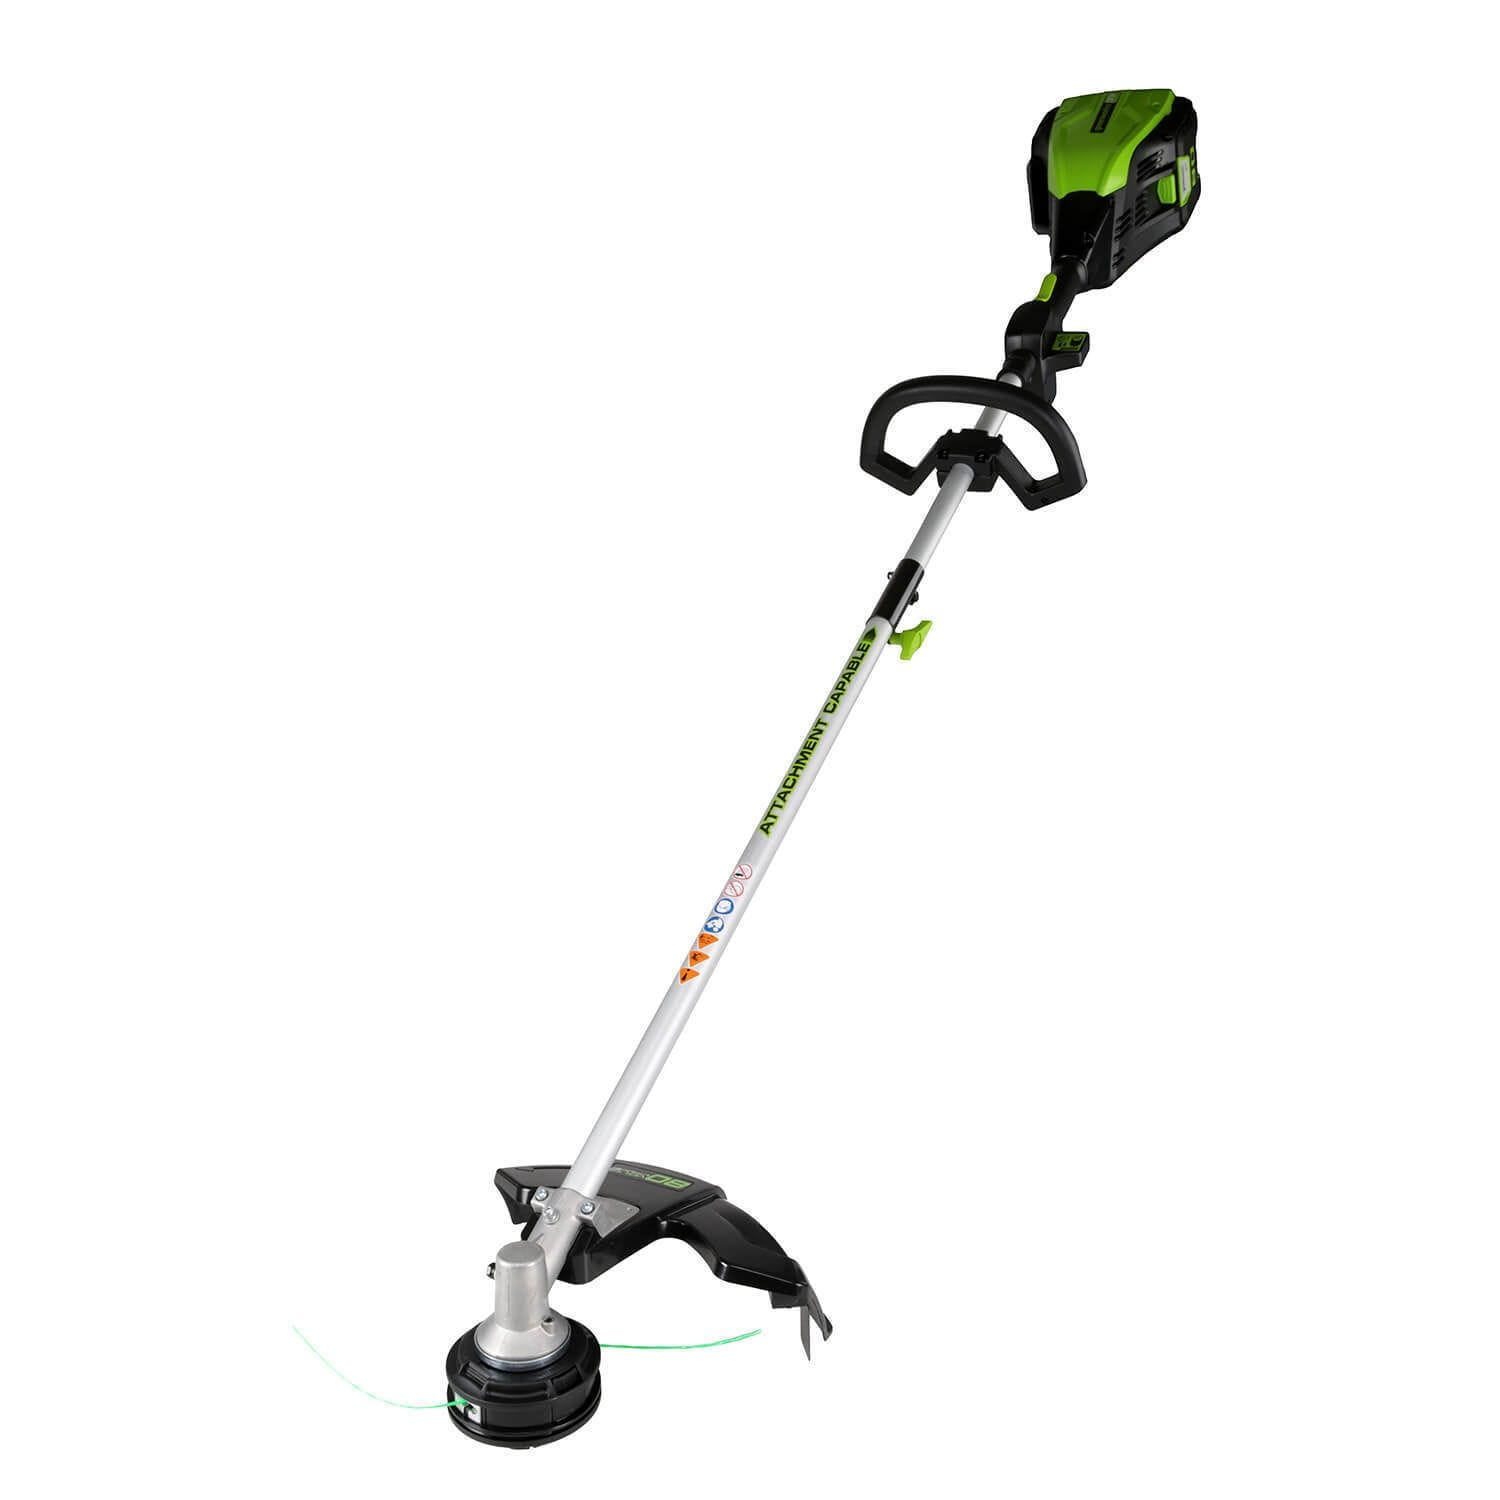 Edger 21142 Greenworks 10 Amp 18-inches Straight Shaft Electric String Trimmer